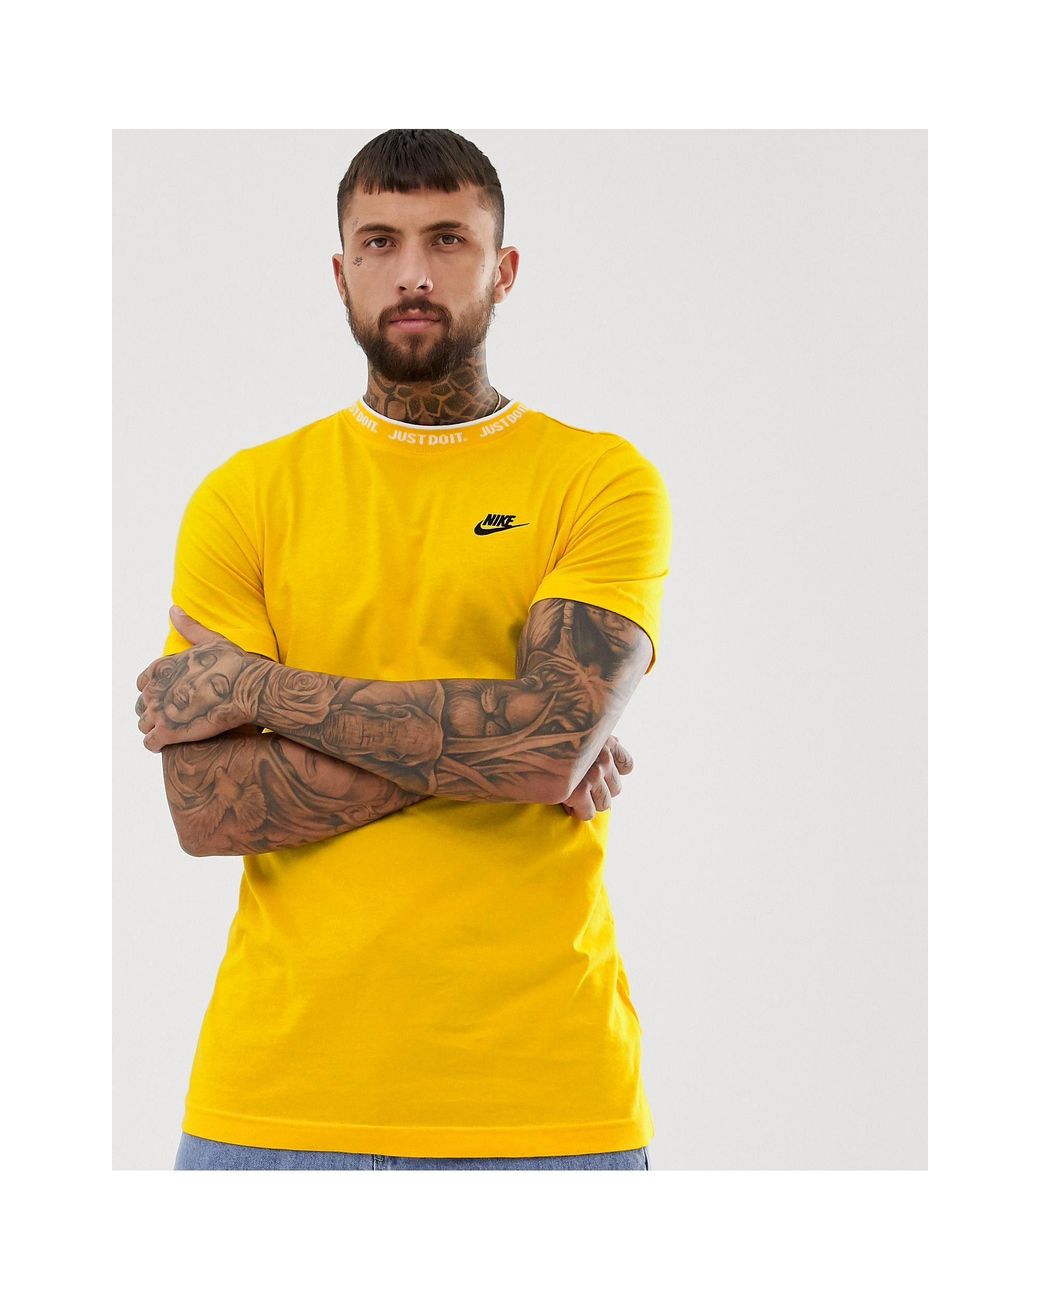 camisetas nike amarillo, generous deal UP TO 75% OFF - www.apmf.mg